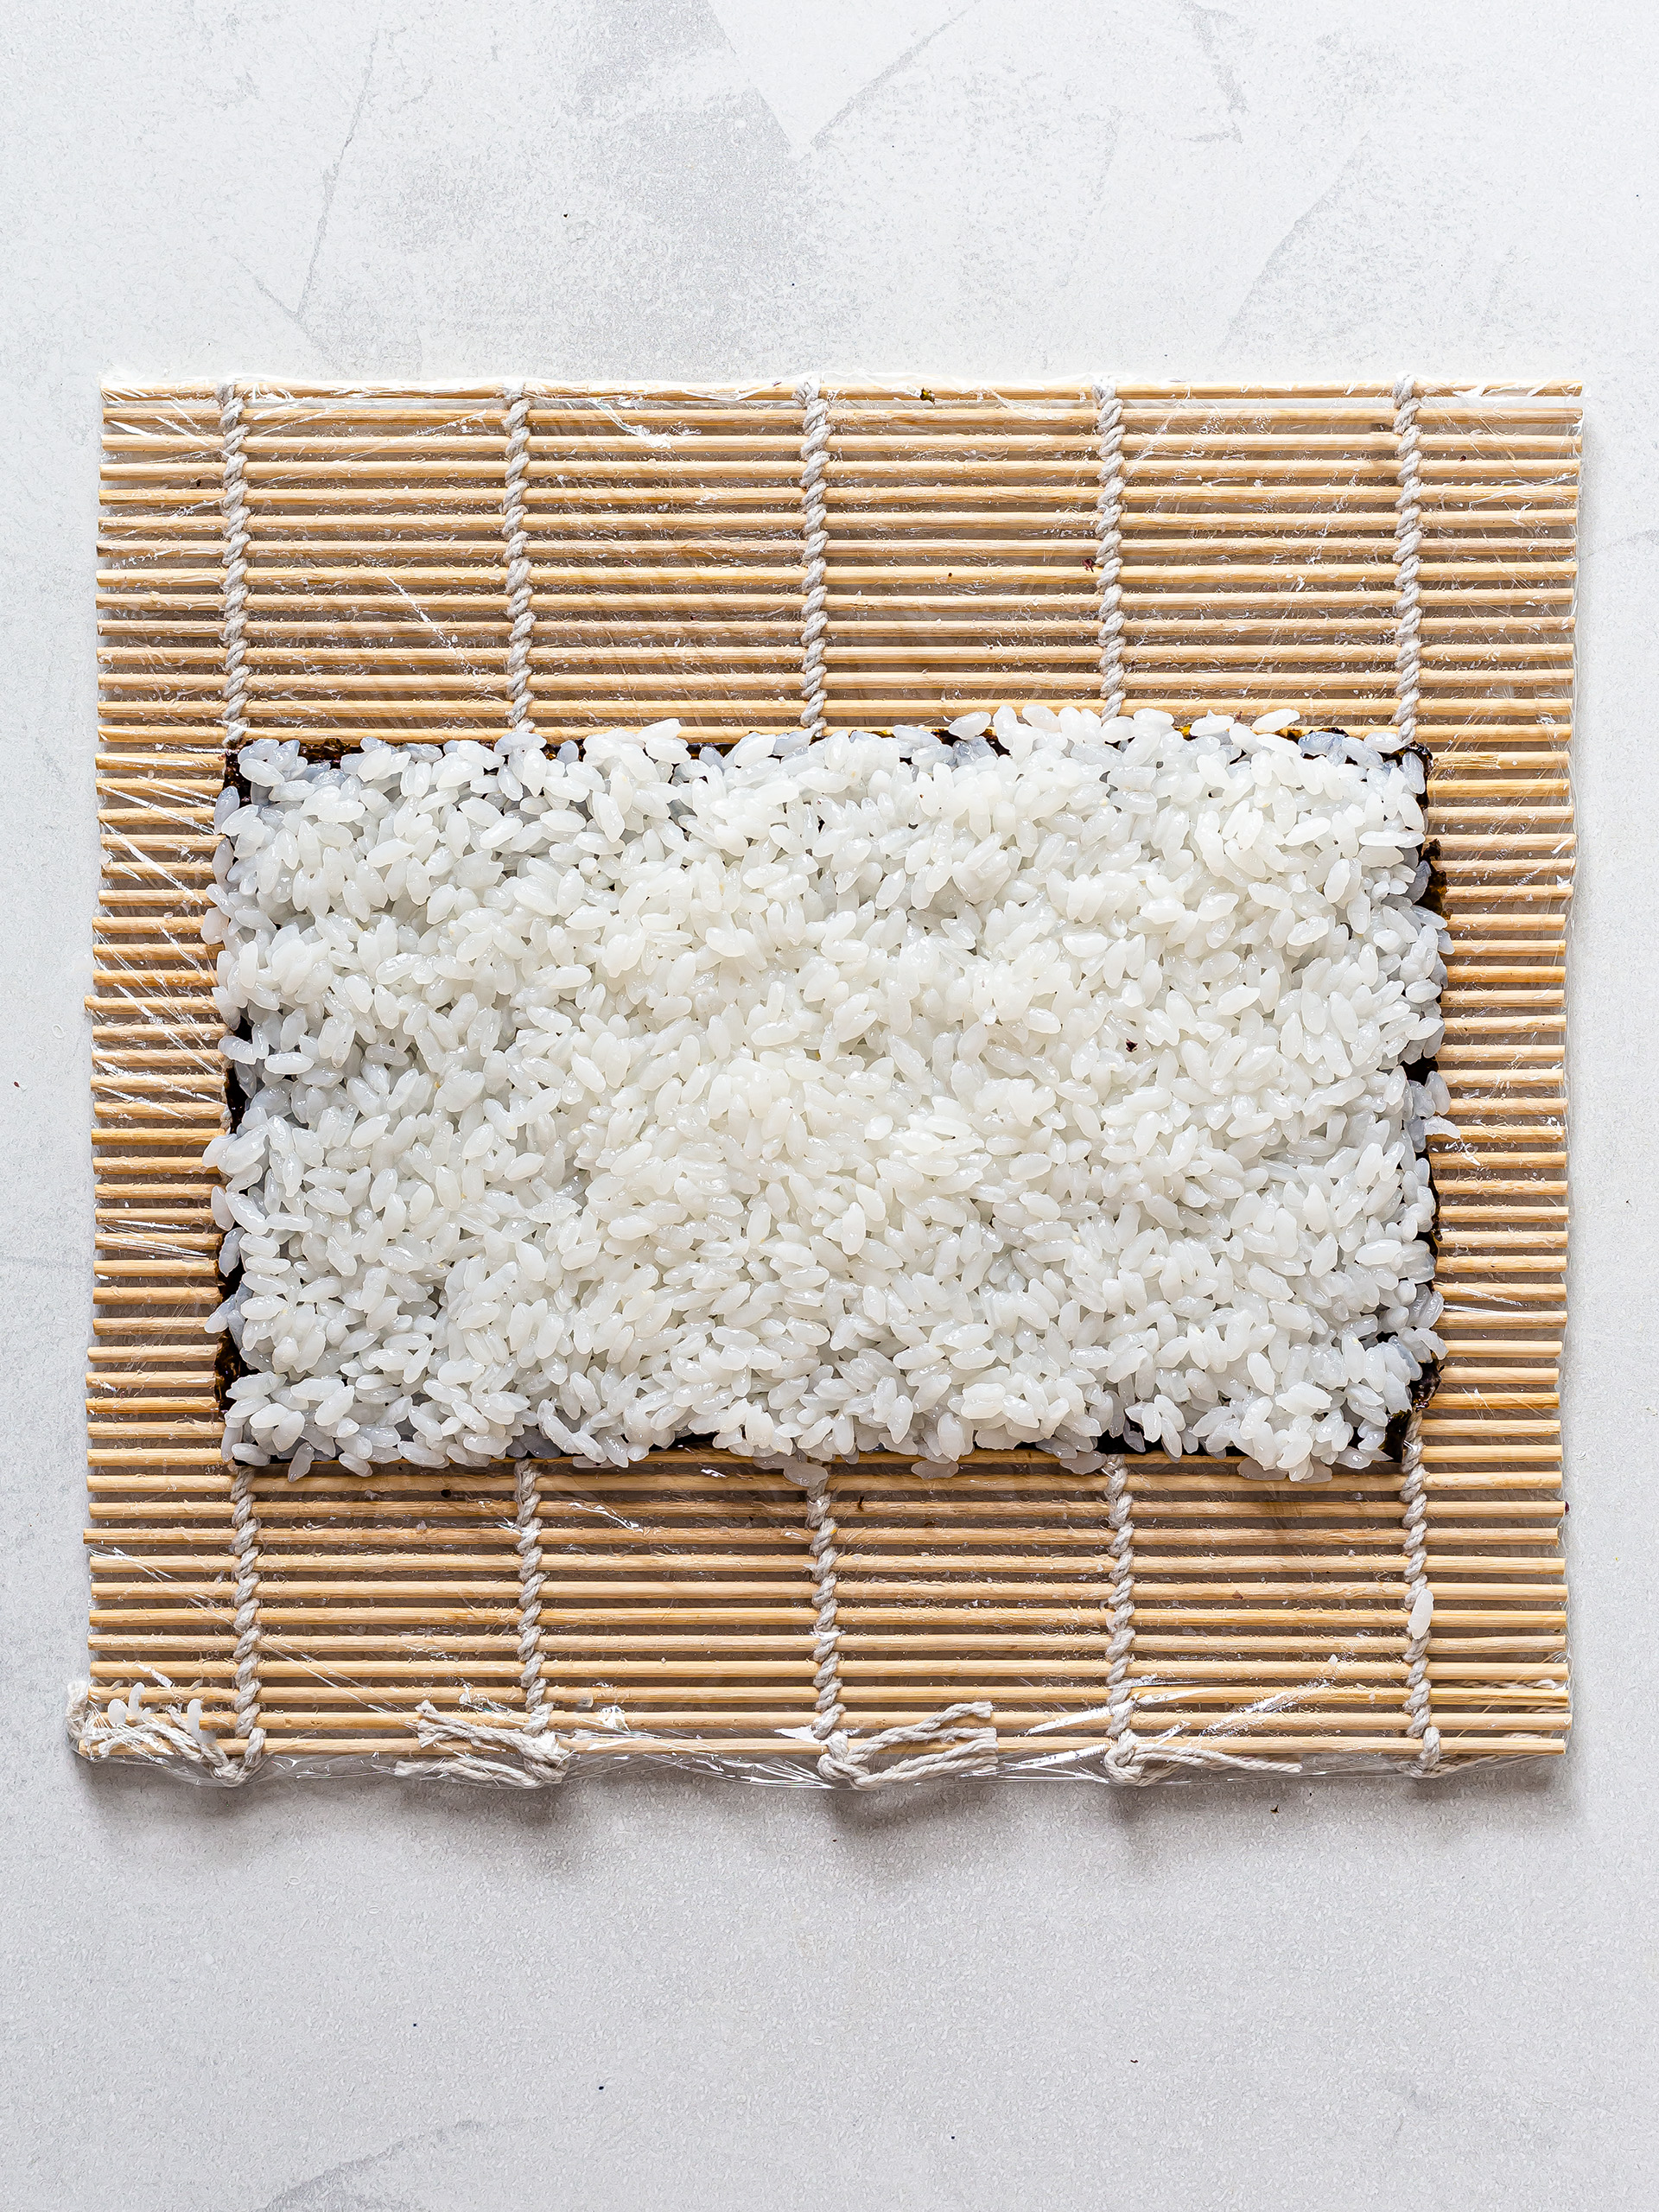 nori sheet covered with sushi rice